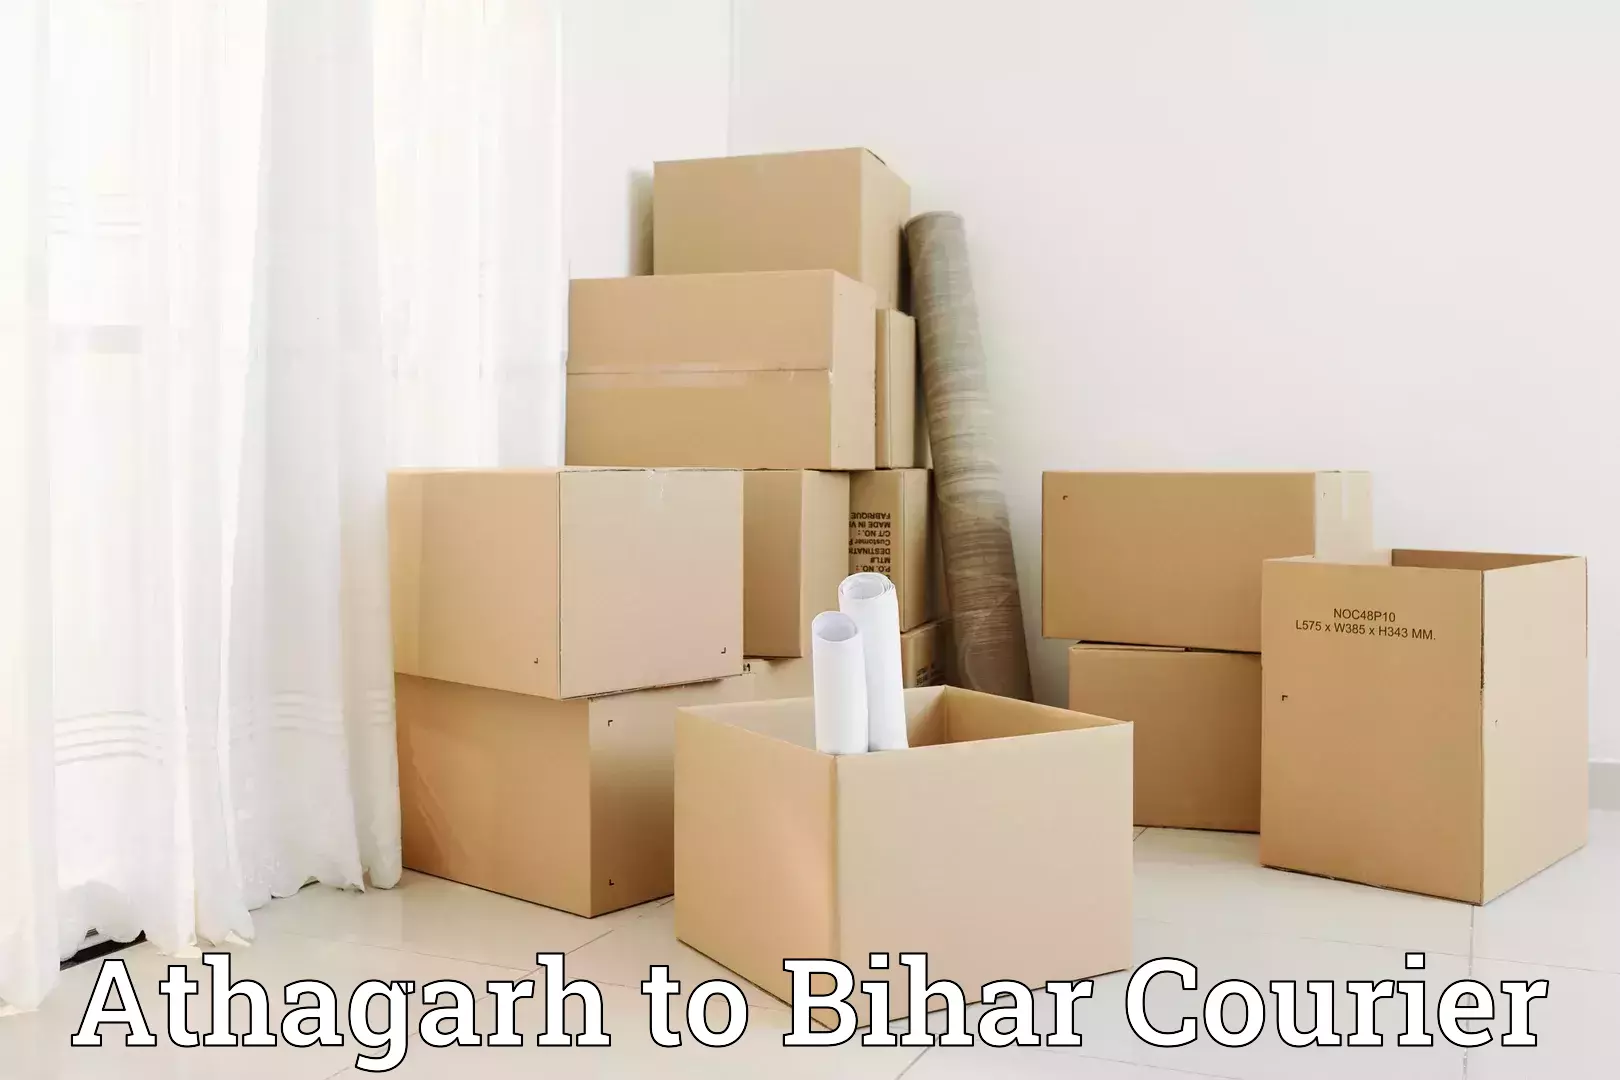 Furniture delivery service Athagarh to Patna